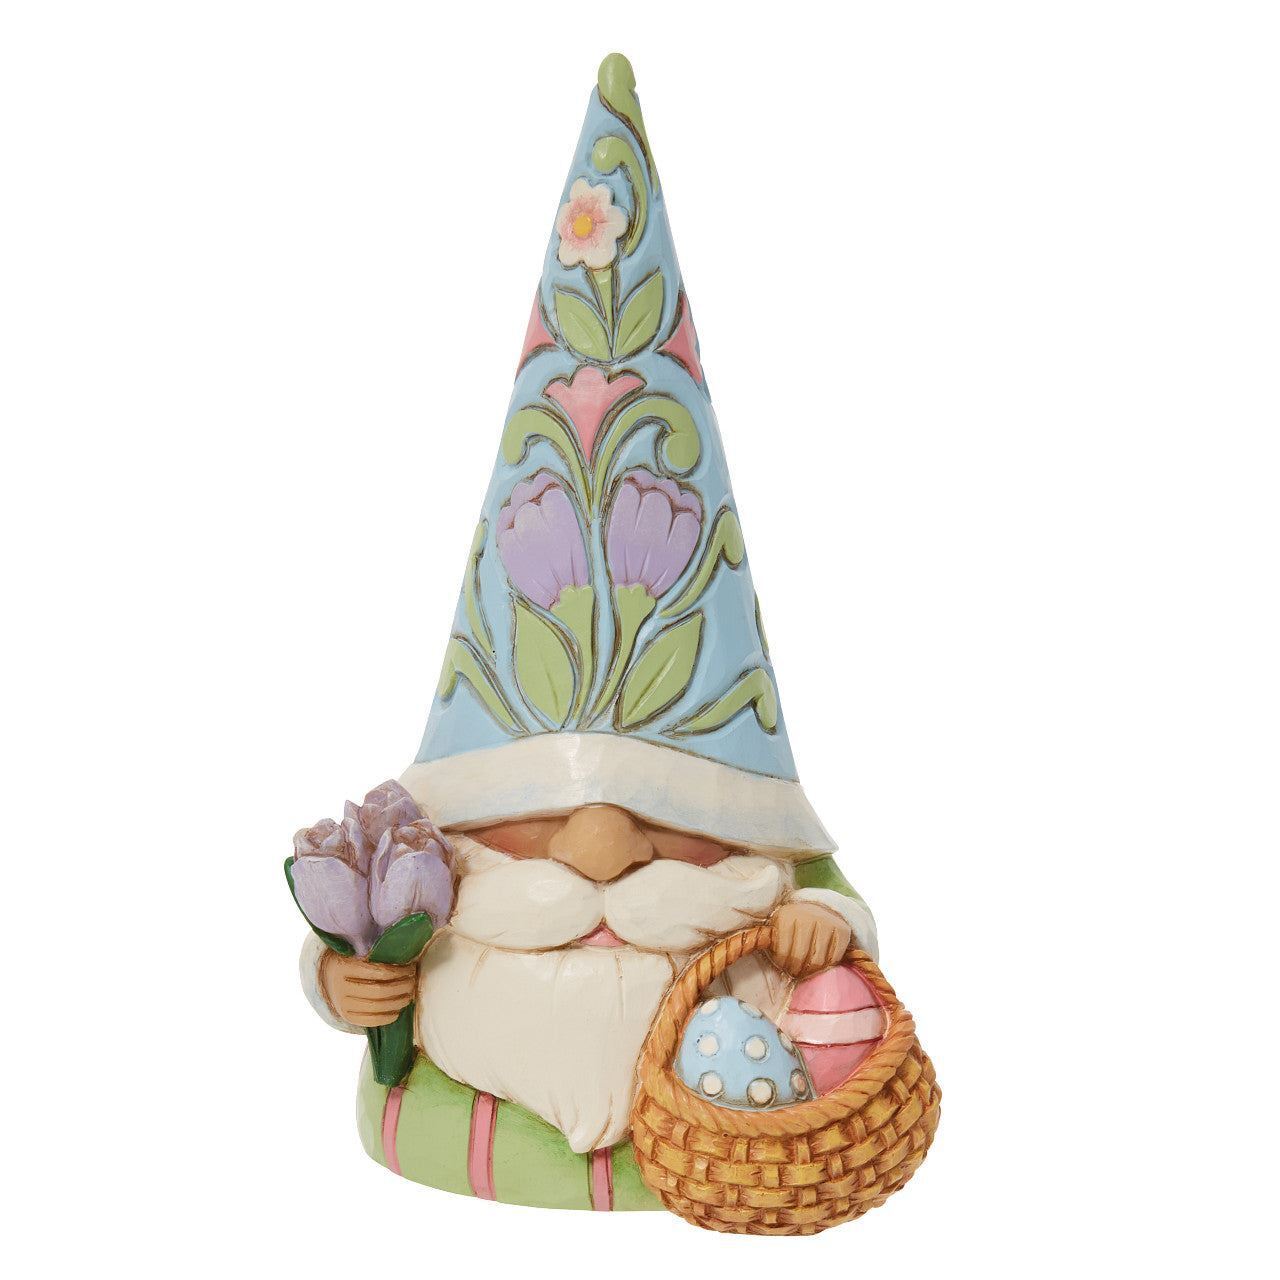 Jim Shore Heartwood Creek Easter Gnome with Basket Figurine 6012438